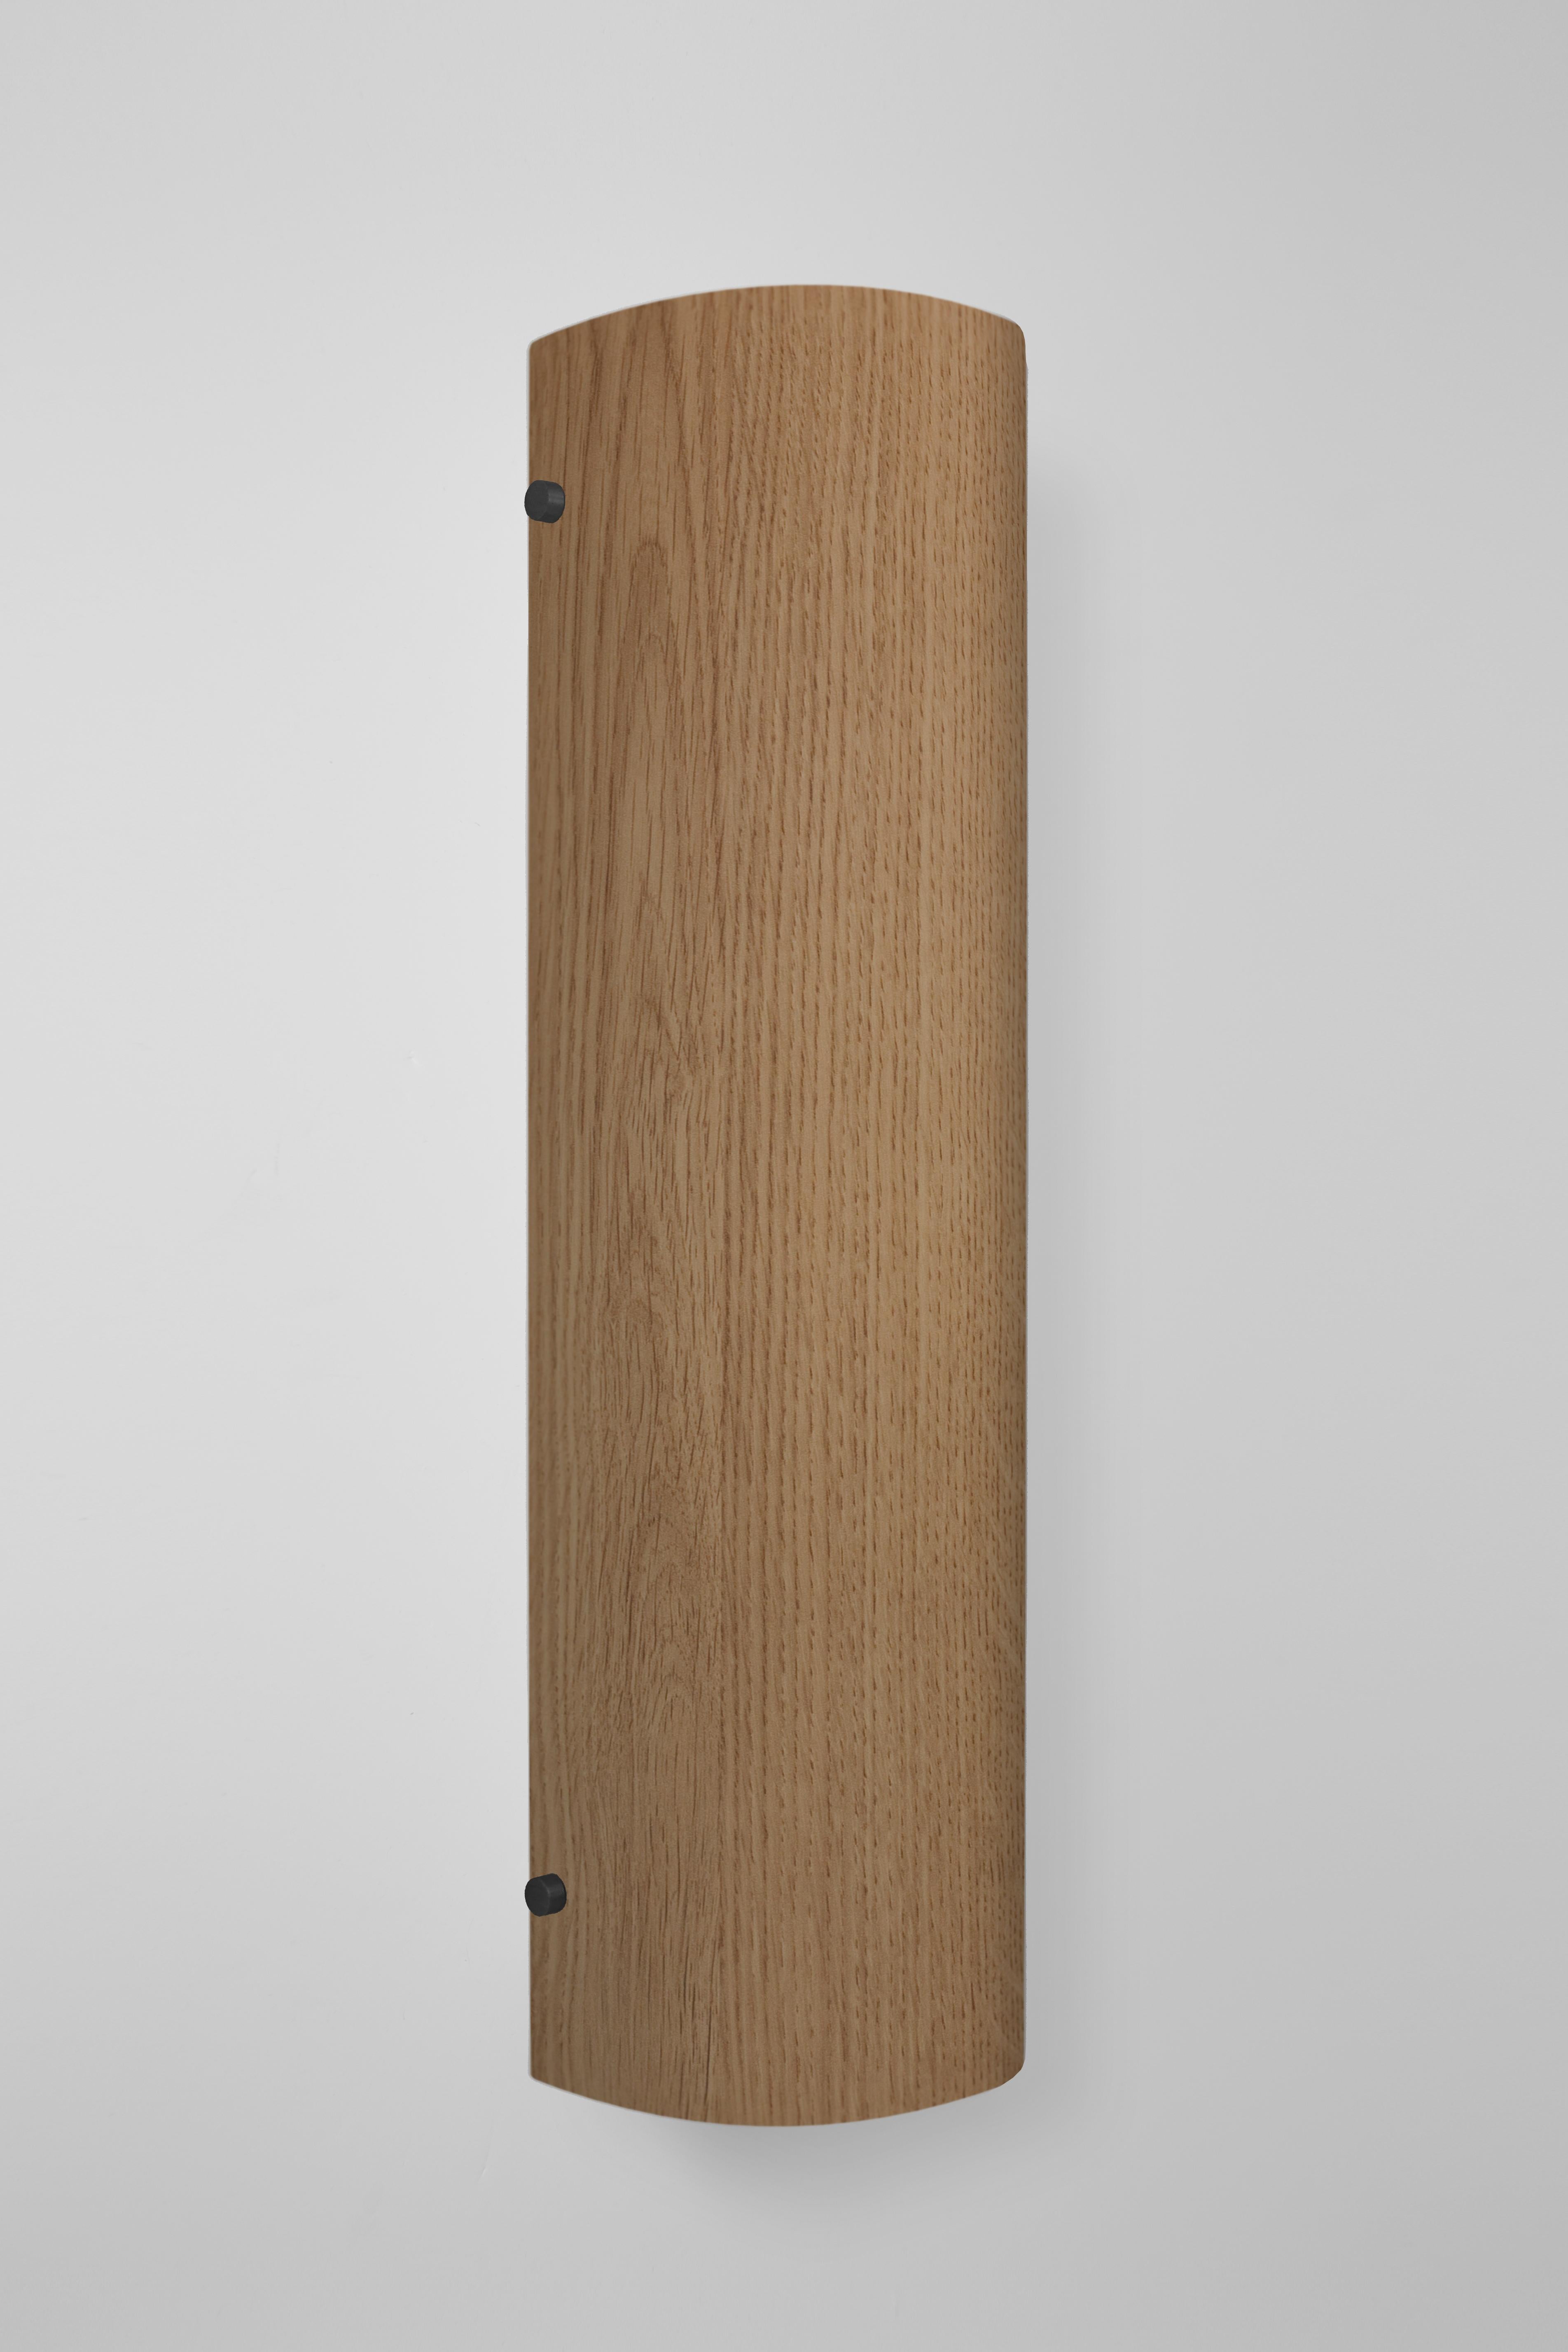 Orphan work 101W Sconce
Shown in oak with blackened brass. 
Available in natural oak brushed or blackened brass. 
Measures: 19”H x 4 3/4”W x 4 1/2”D
Wall or ceiling mount
Vertical or horizontal
Plug-in by request
UL approved
Holds (2) 60W candelabra